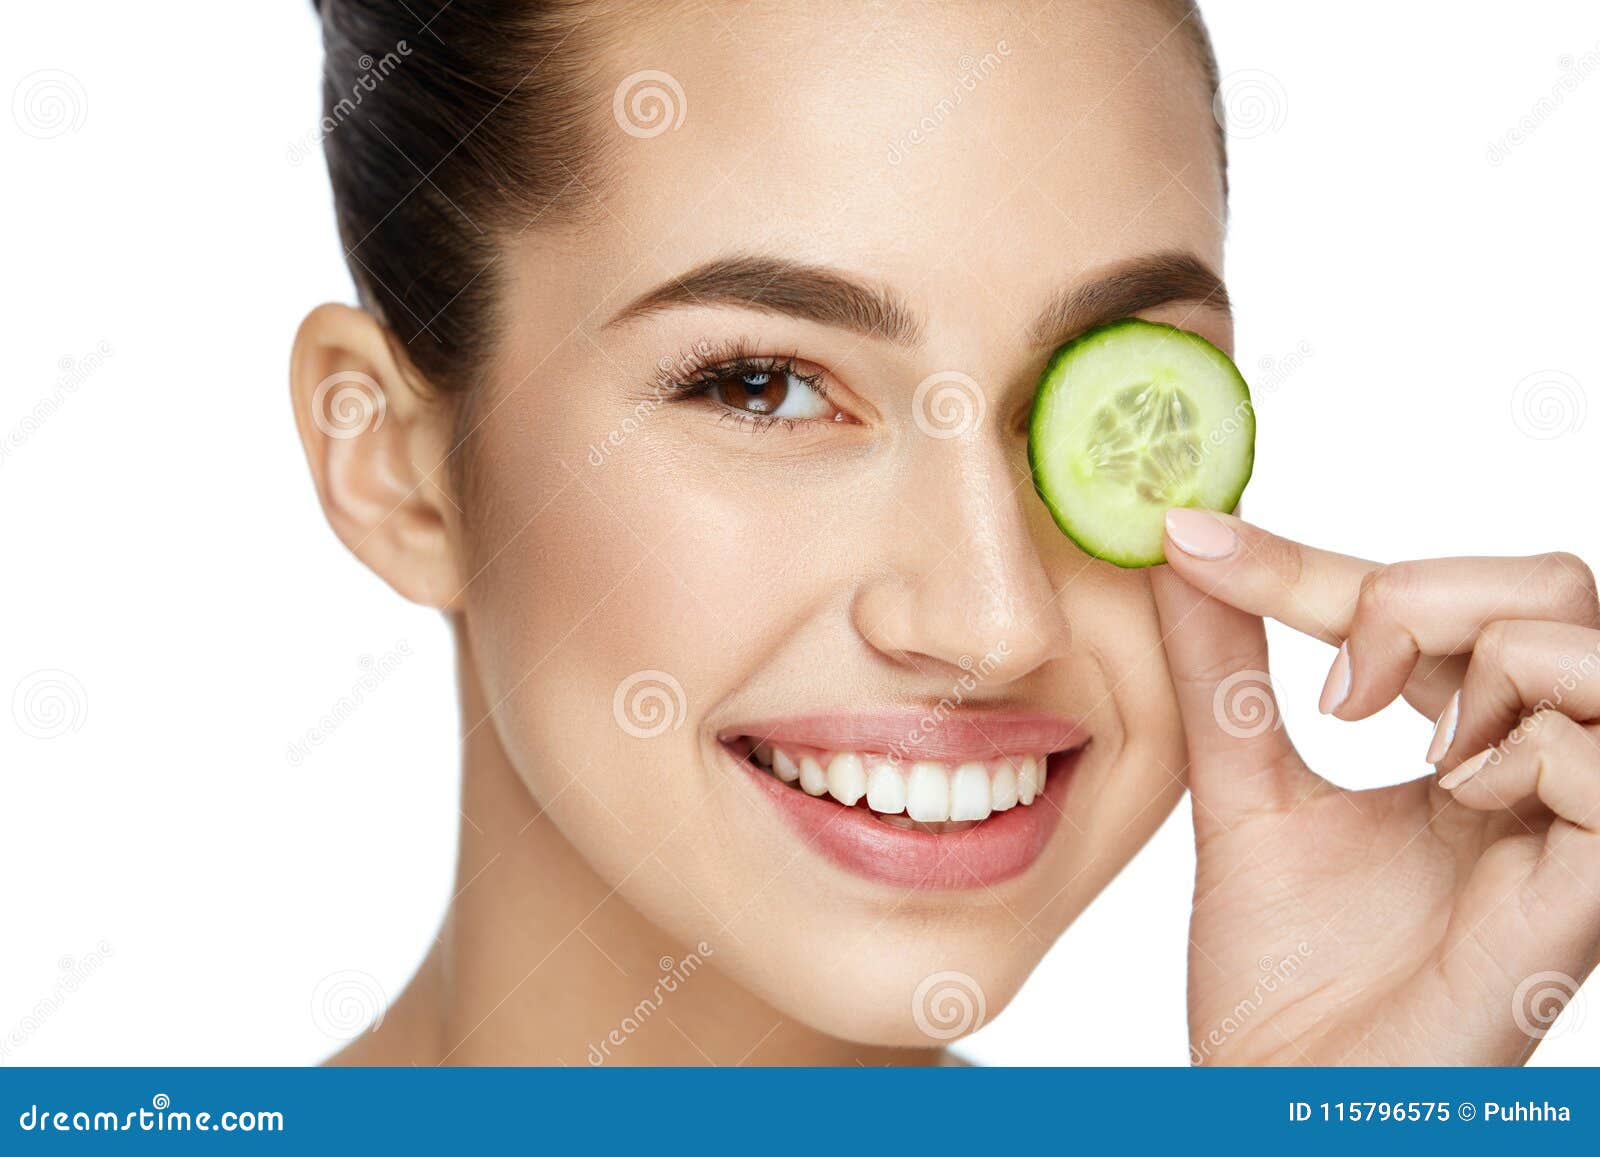 eye skin care. woman with natural makeup using cucumber